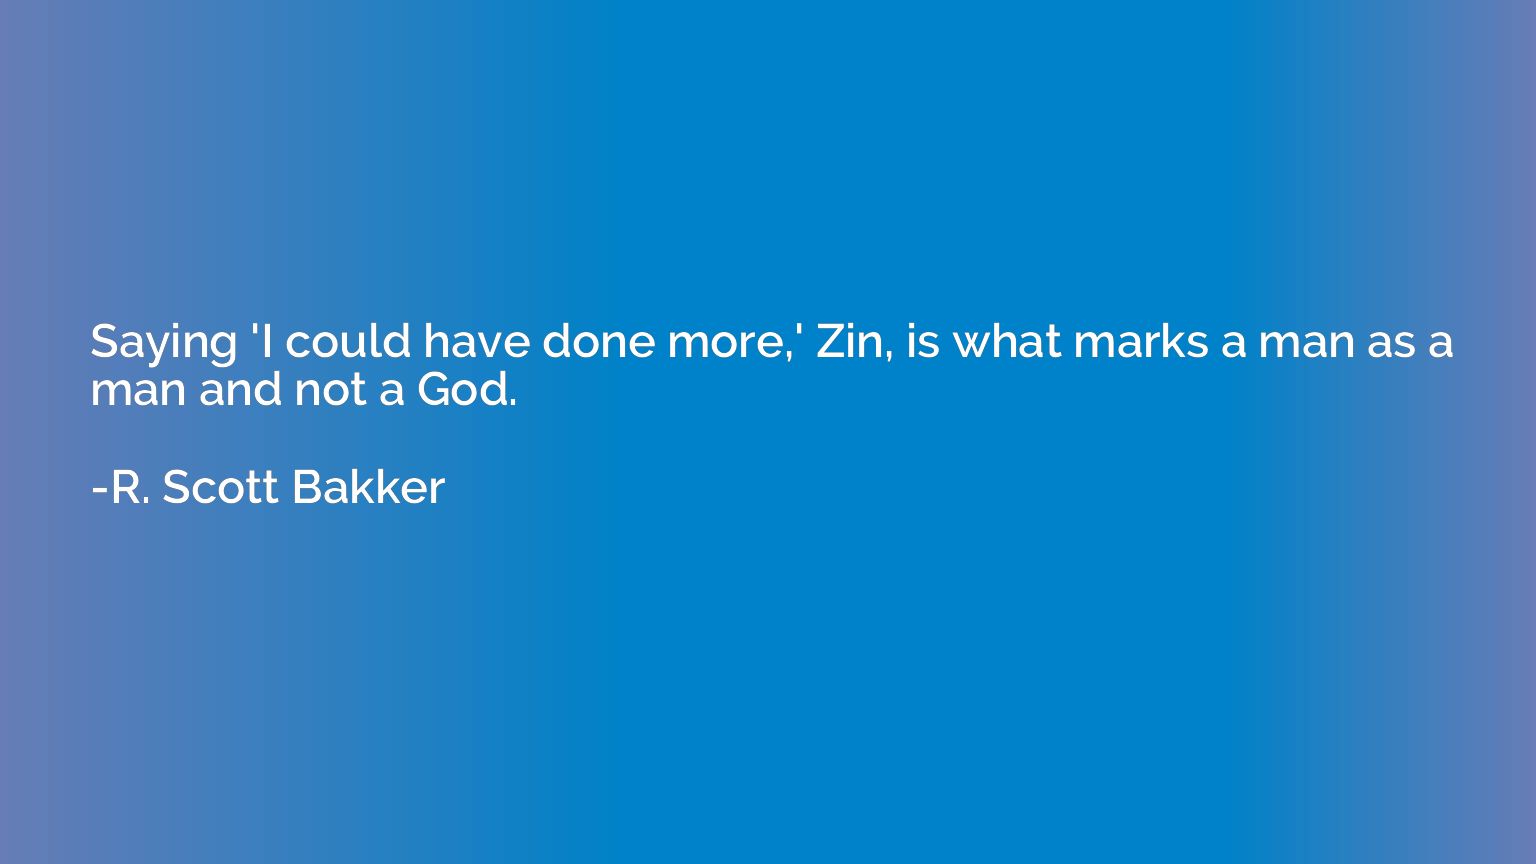 Saying 'I could have done more,' Zin, is what marks a man as